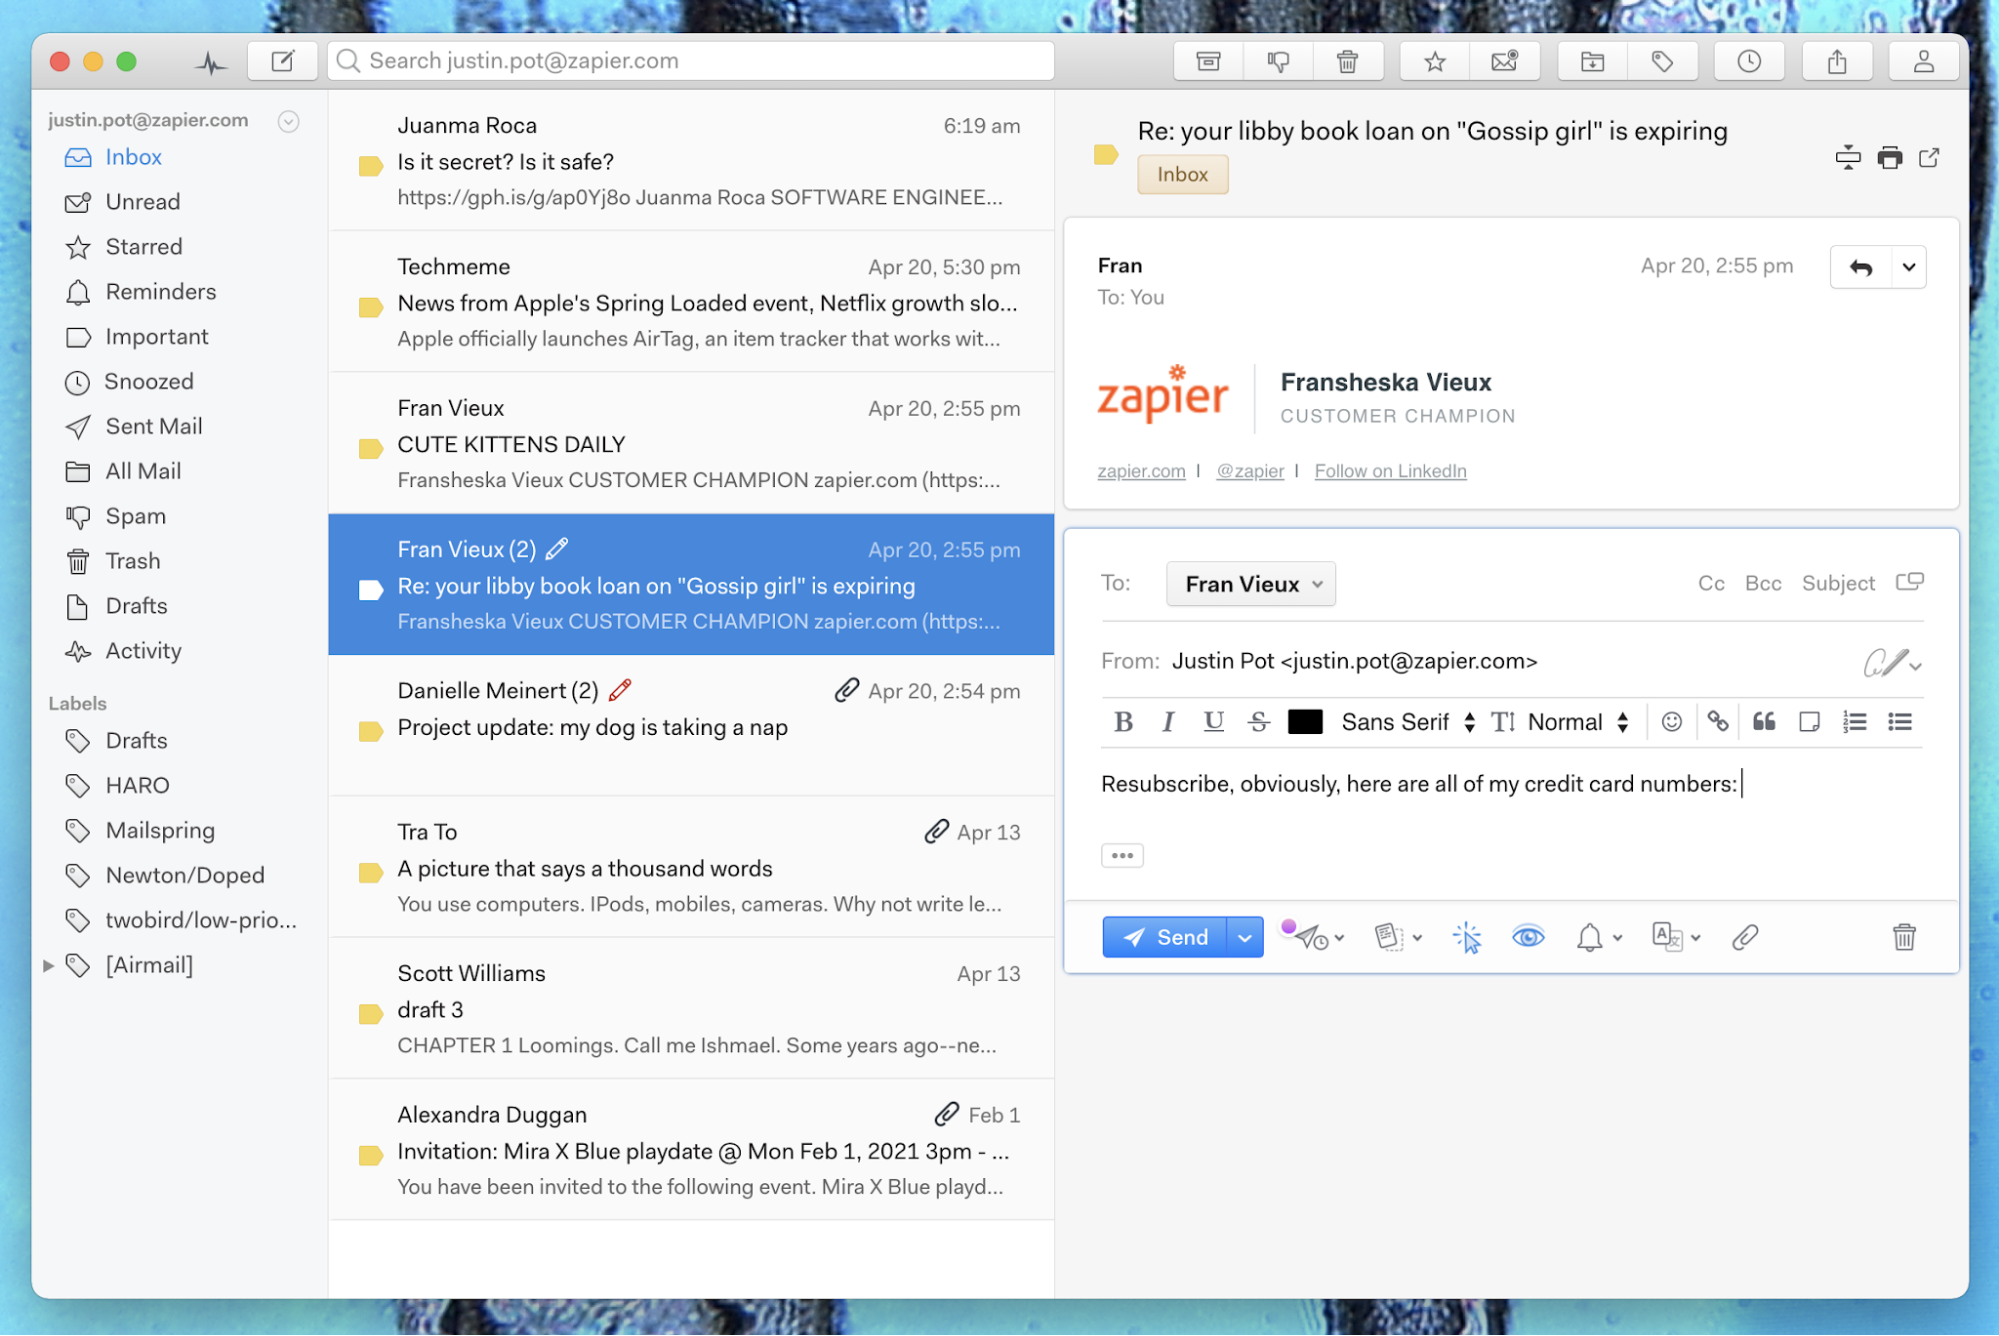 best email clients for gmail on mac